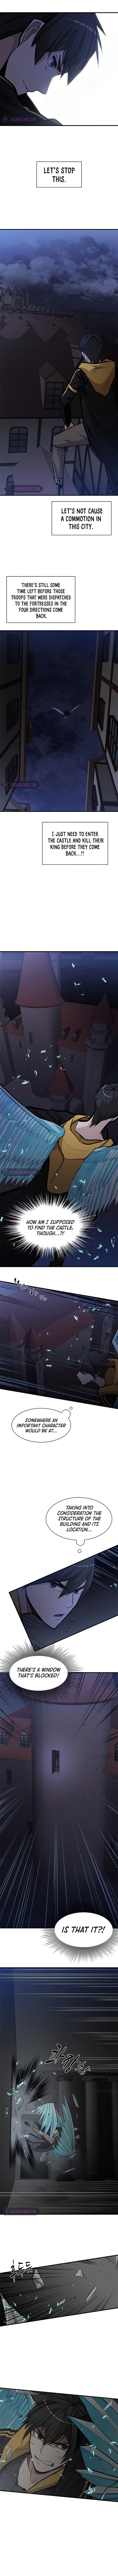 The Tutorial is Too Hard - Chapter 27 Page 6